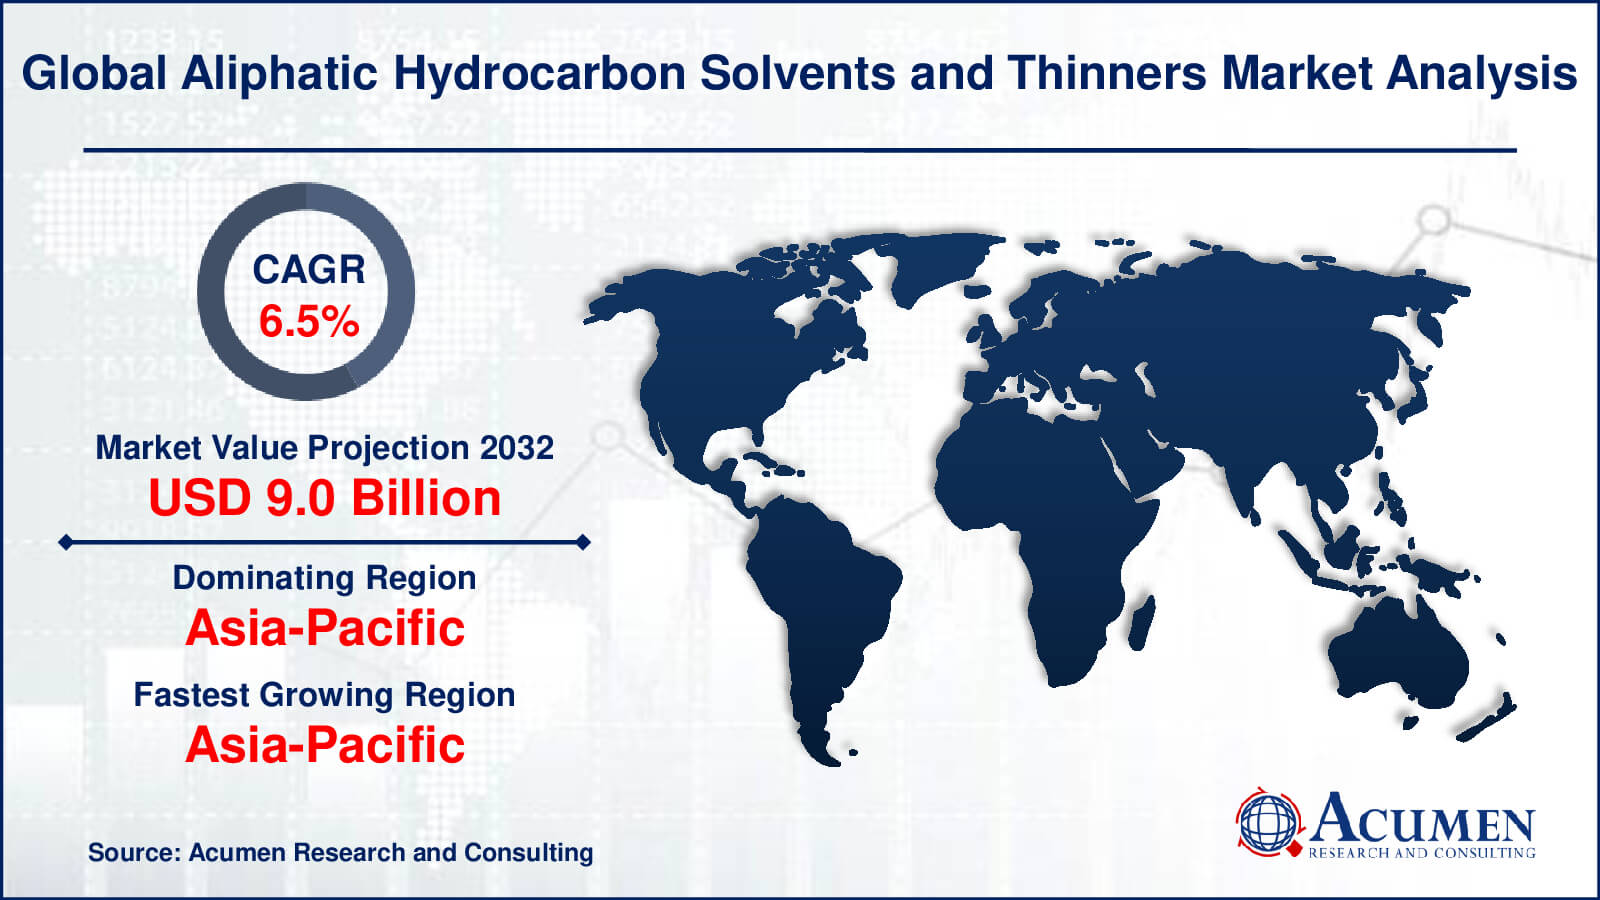 Aliphatic Hydrocarbon Solvents and Thinners Market Report Statistics